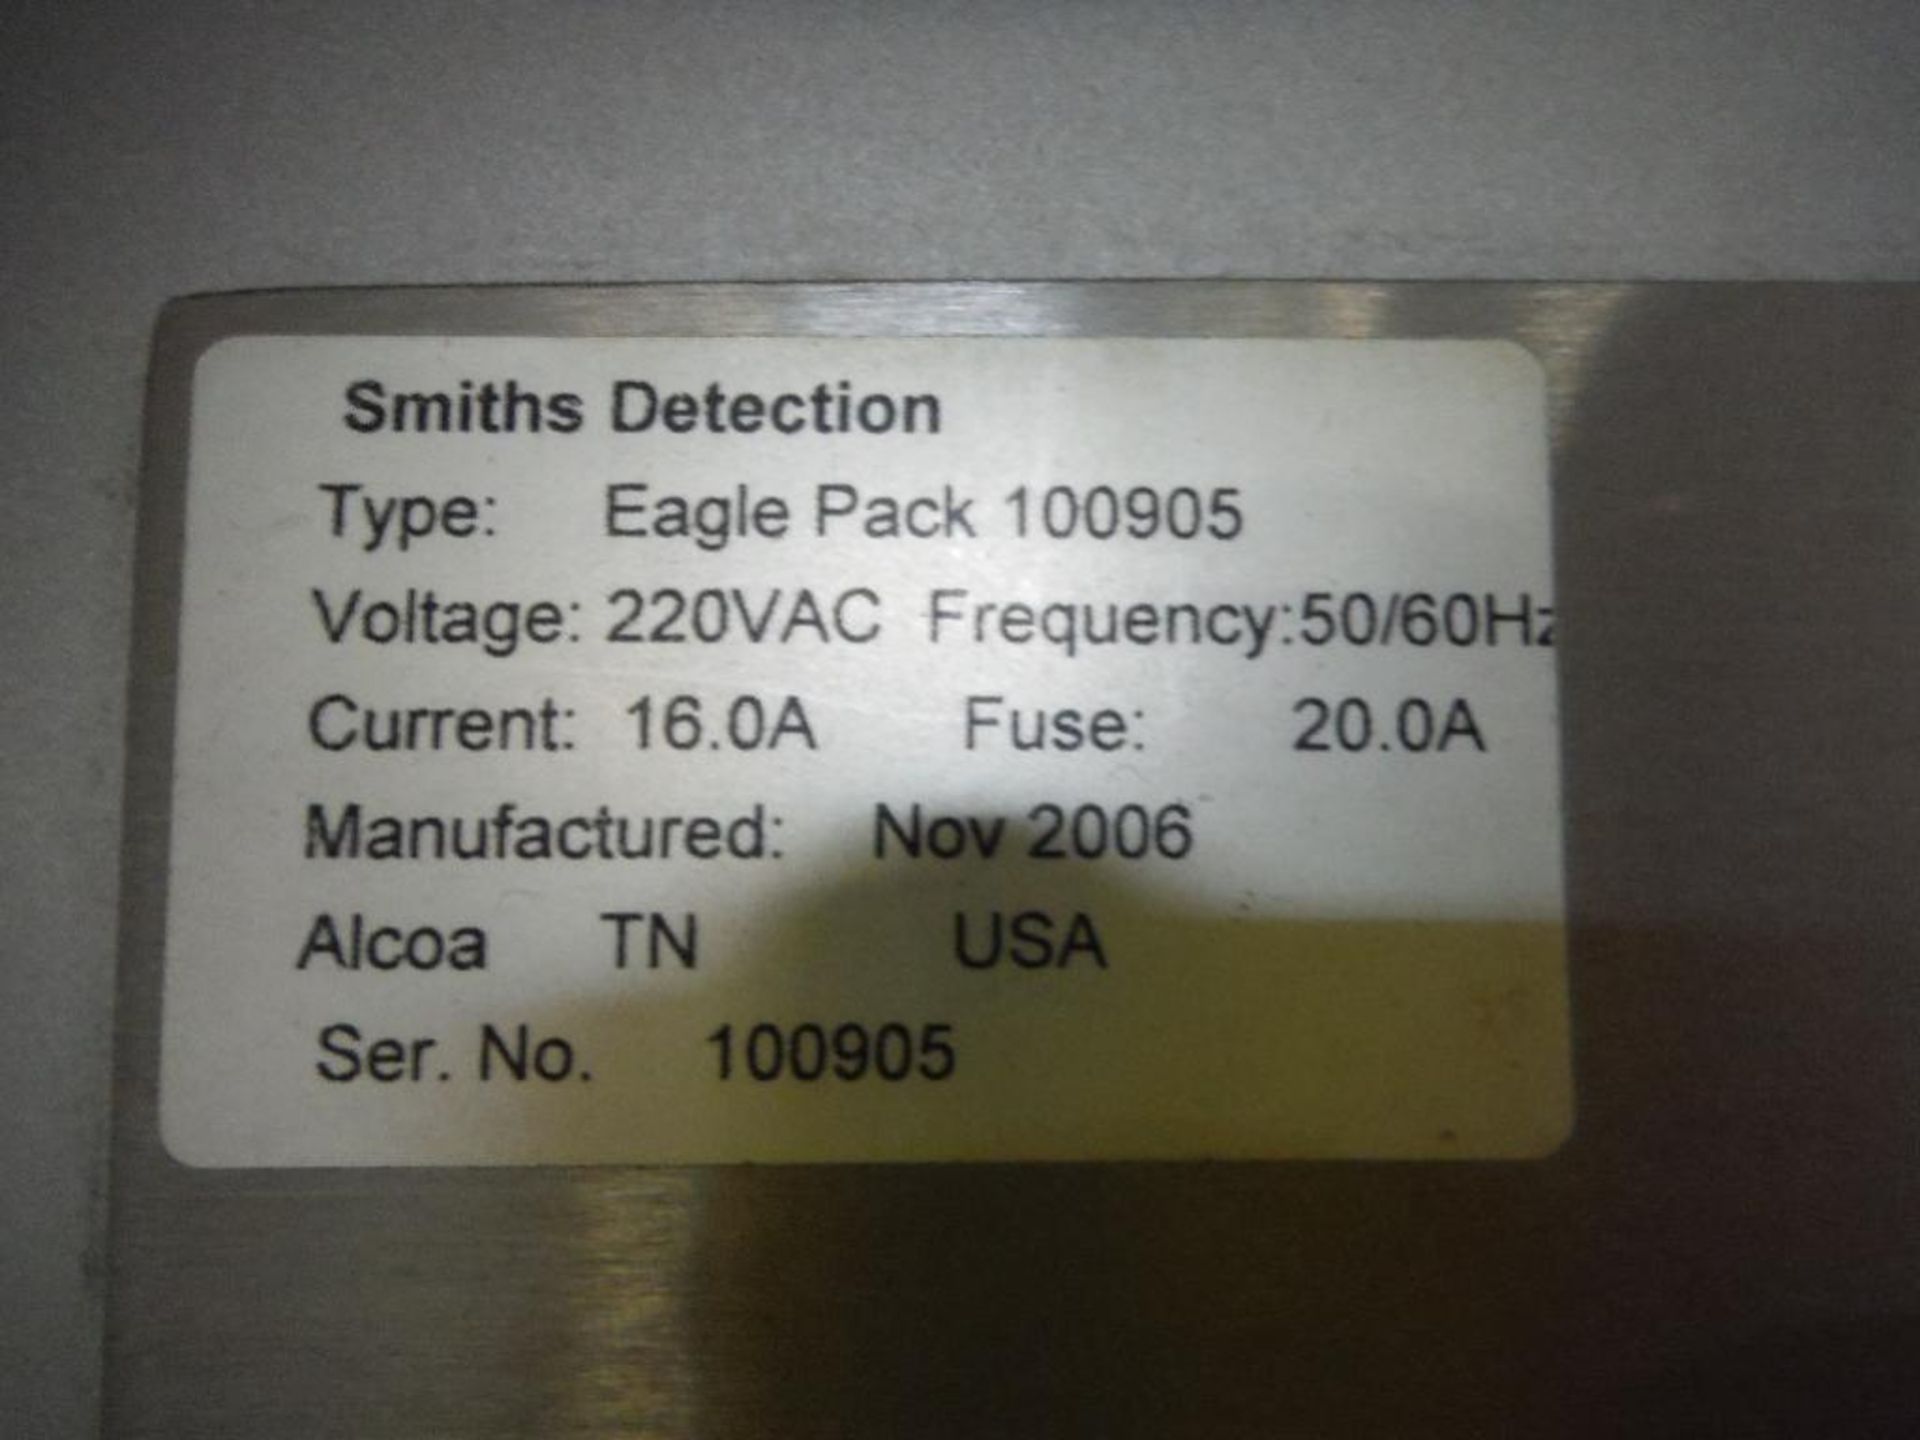 2006 Smith x-ray machine, Model Eagle Pack TN100905, SN 100905, 18 in. wide x 9 in. tall aperture, 1 - Image 14 of 15